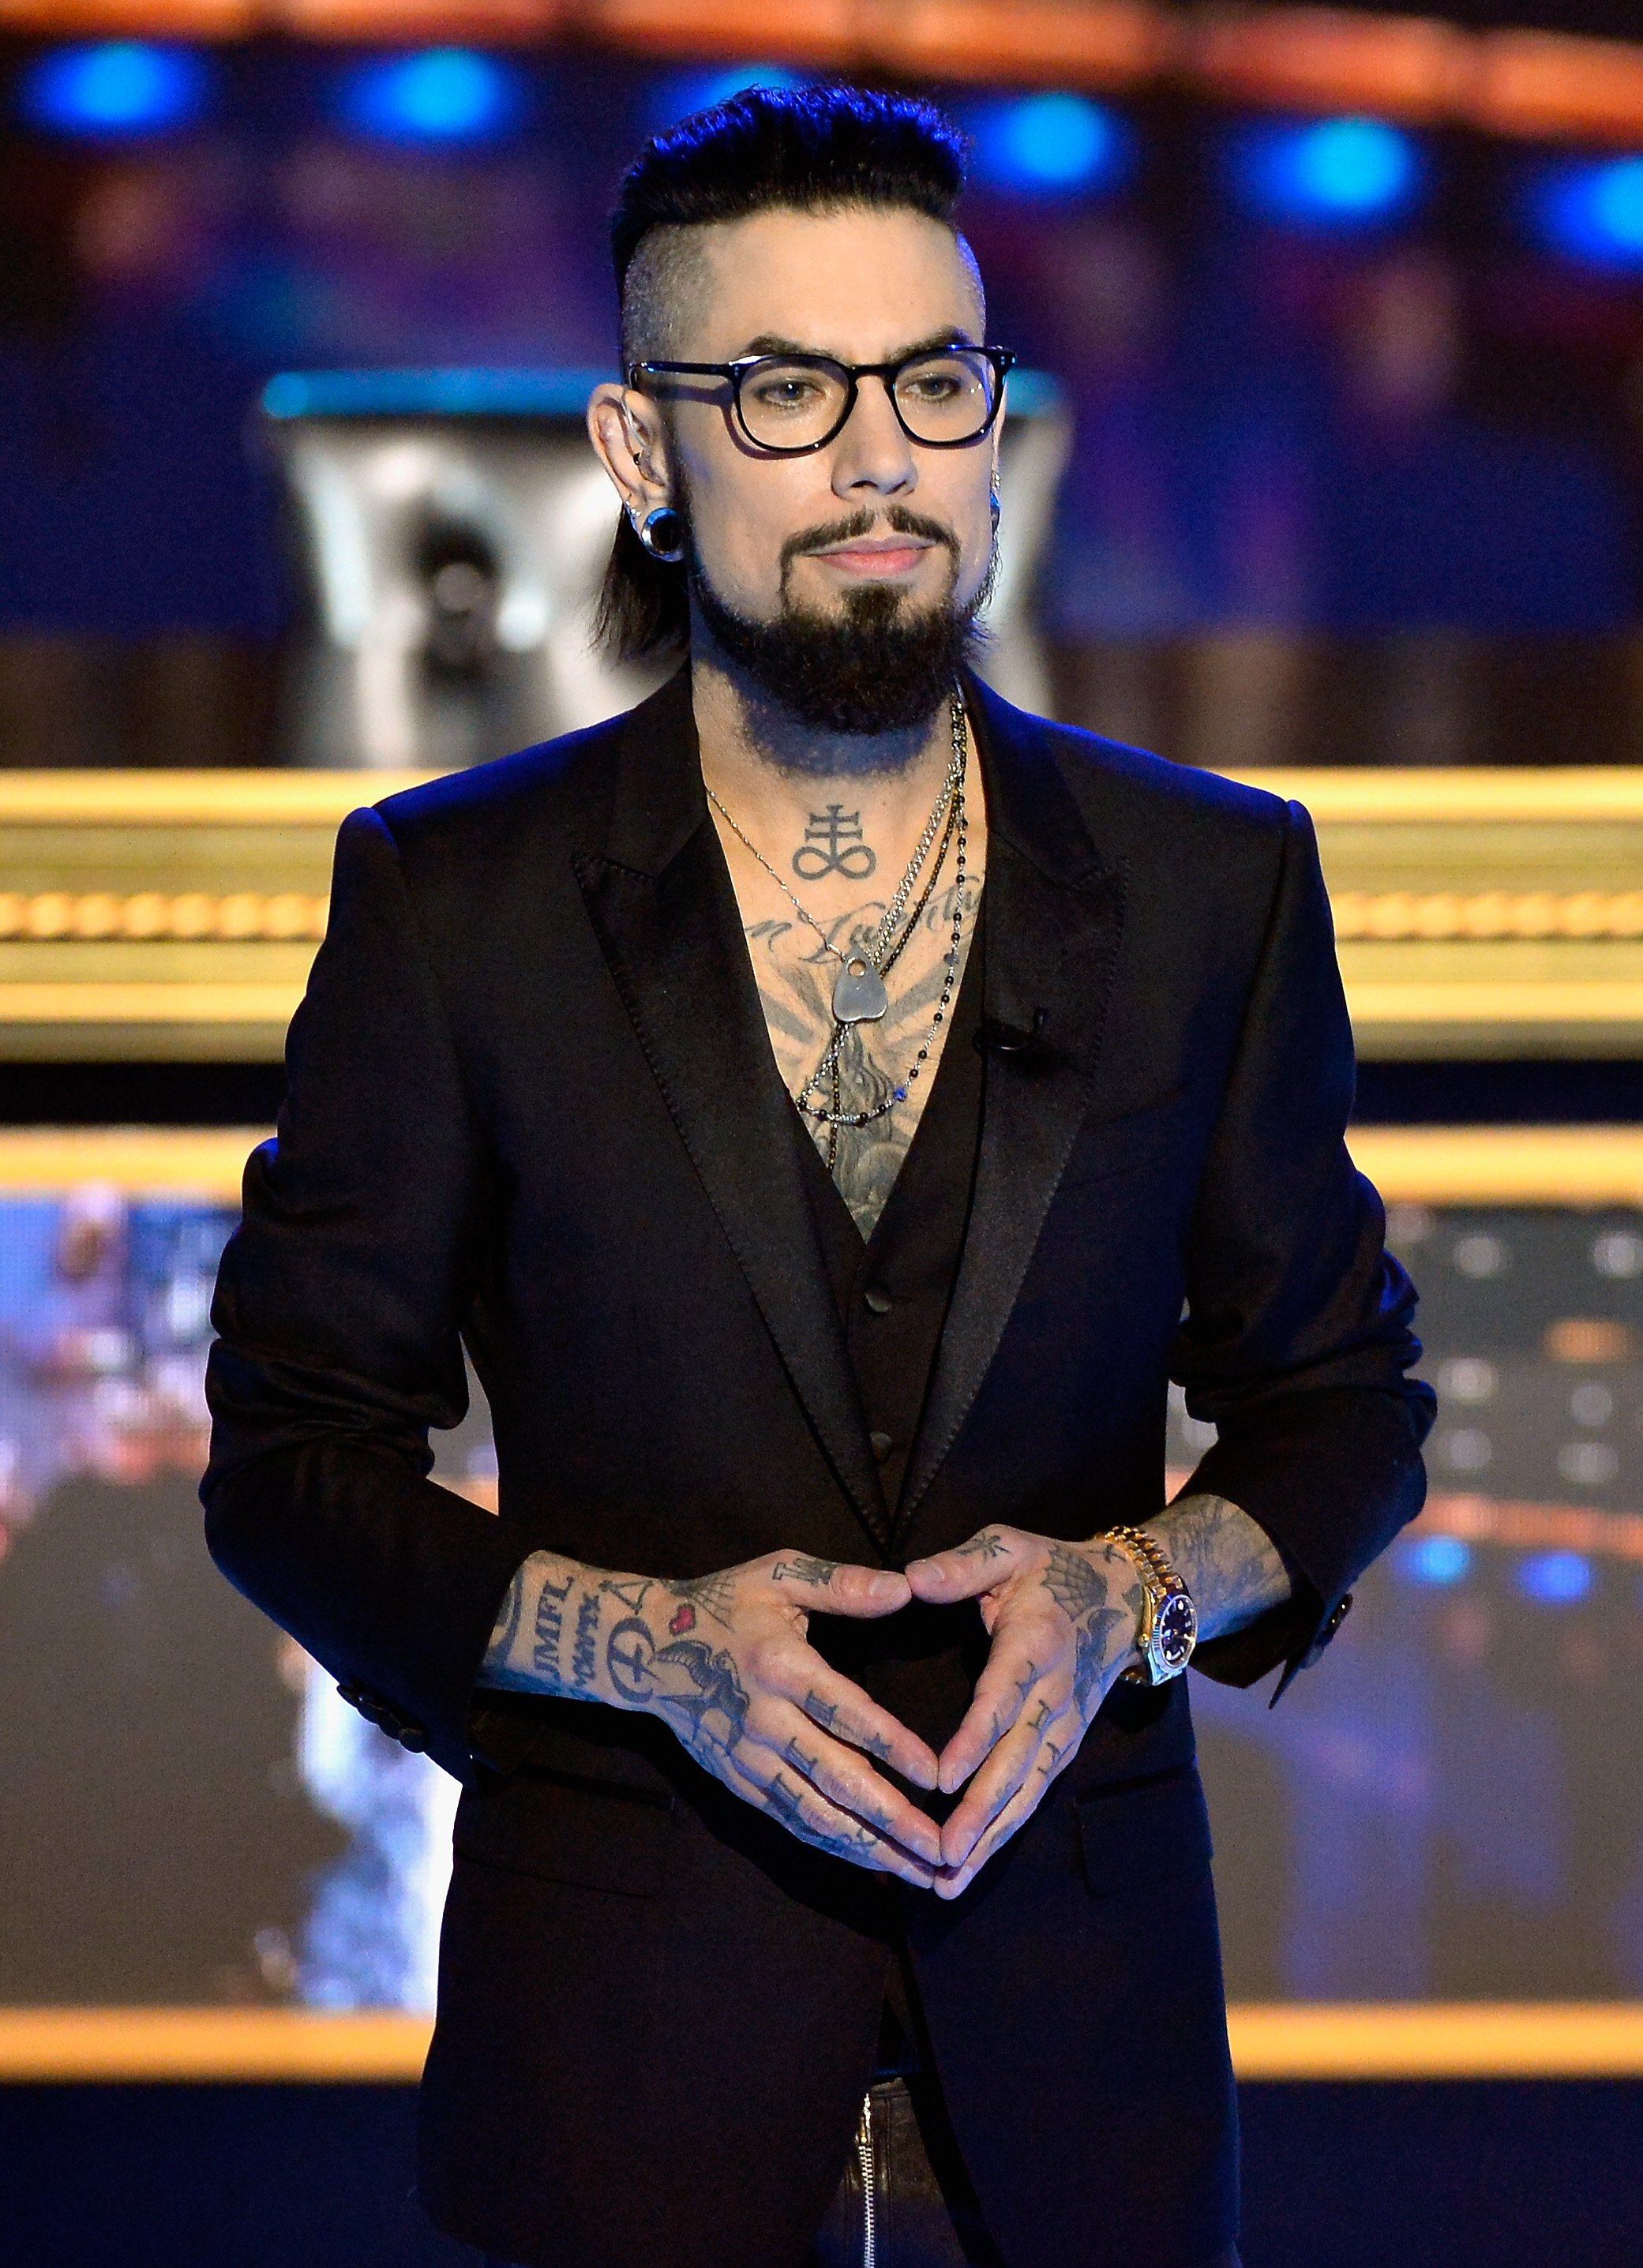 Former Red Hot Chili Peppers guitarist and "Ink Master" host Dave Navarro onstage during the Ink Master Season 10 Finale at the Park Theater at Monte Carlo Resort and Casino in Las Vegas, Nevada | Photo: Bryan Steffy/Getty Images for Paramount Network